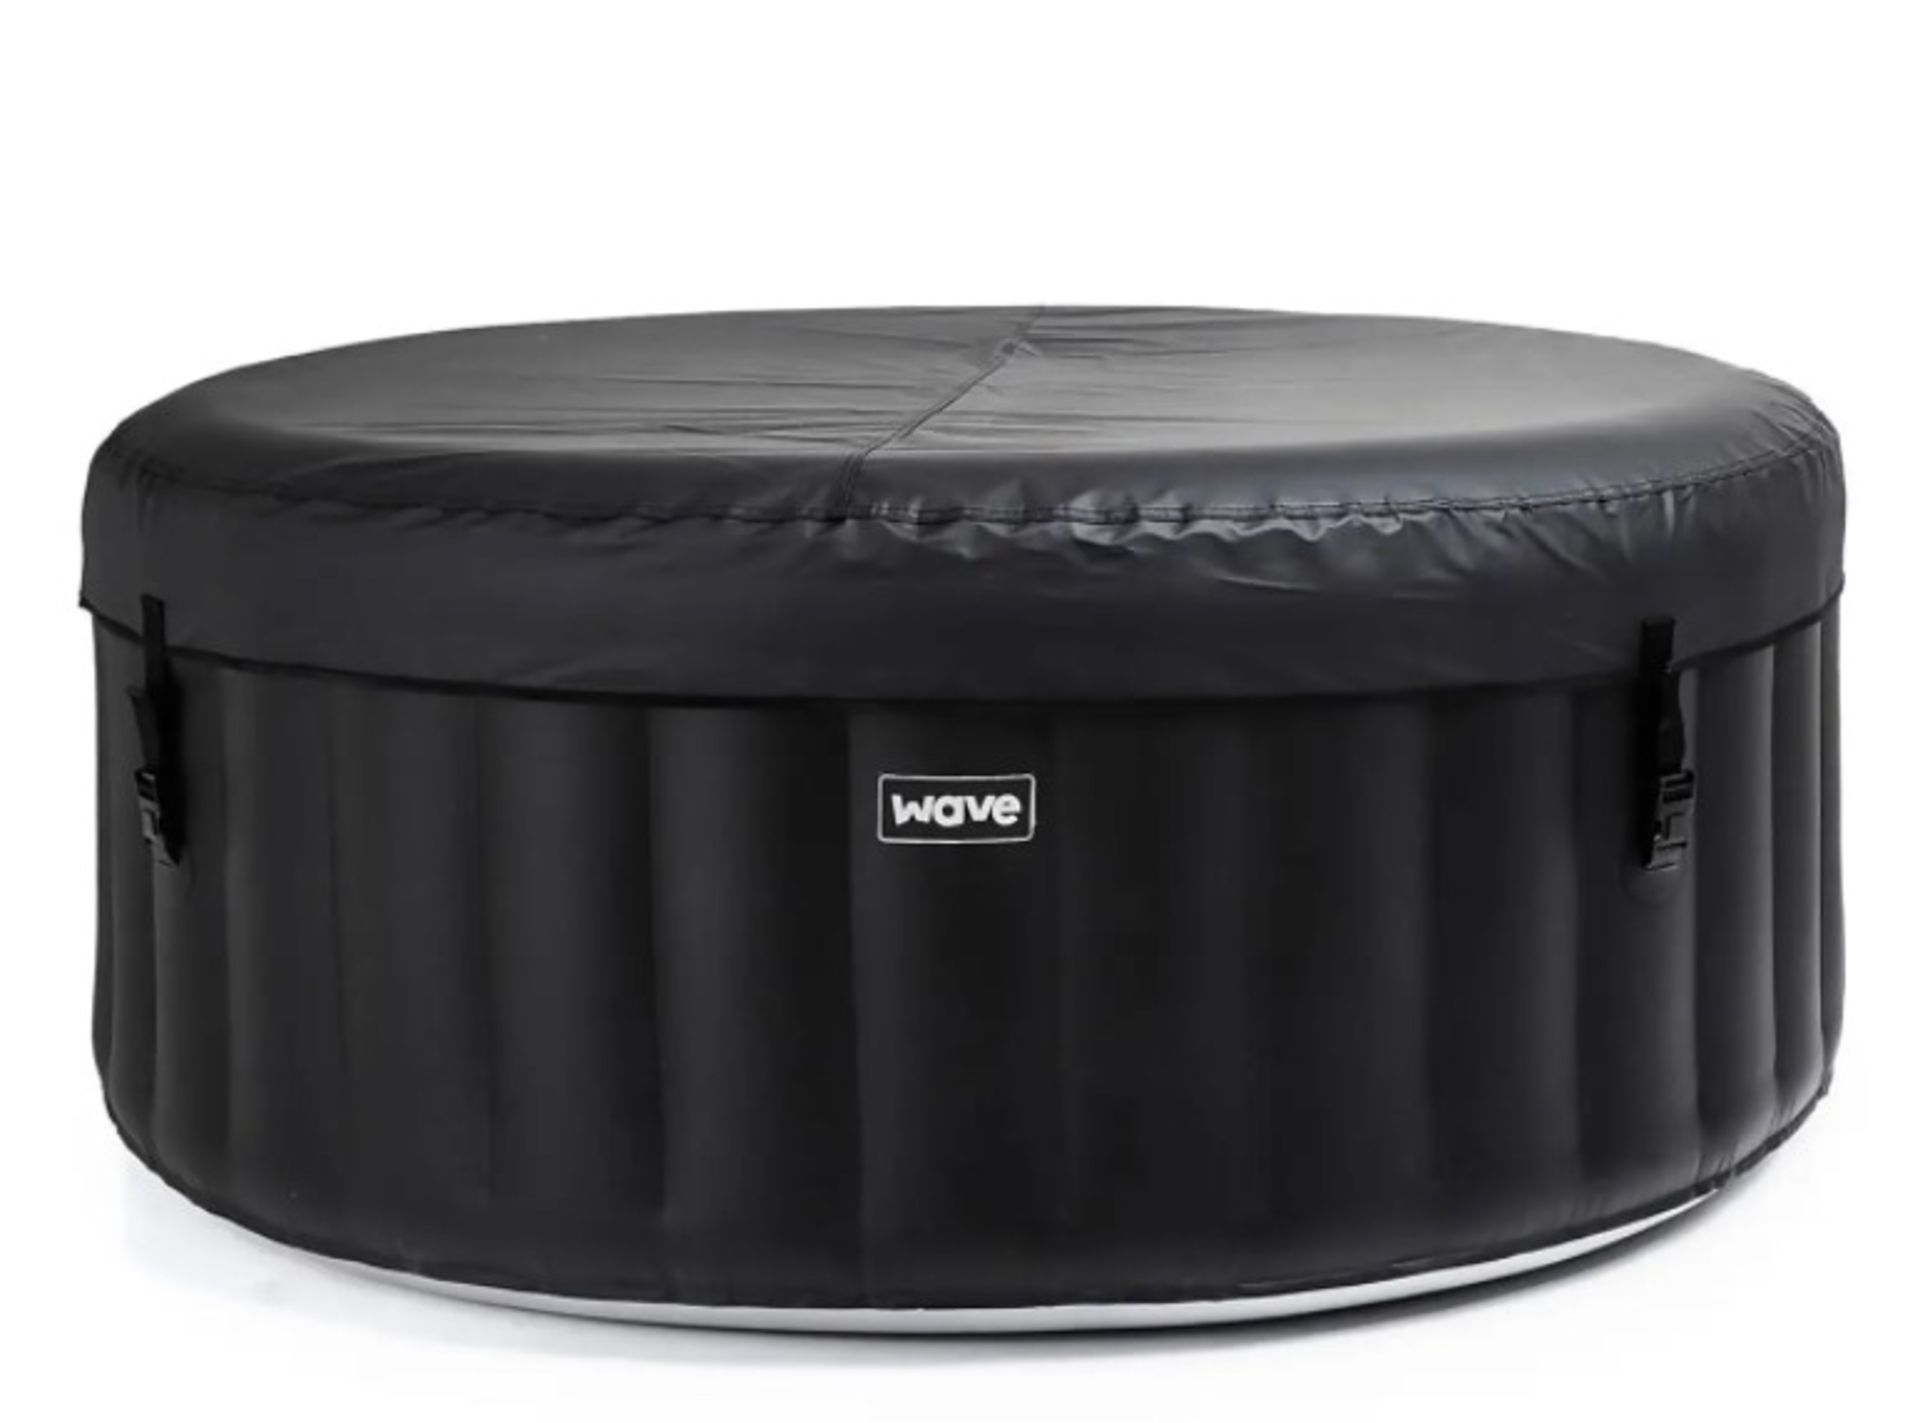 (Mz) 1x Atlantic Wave Solid Black 4 Person Hot Tub RRP £455. Unchecked Direct Customer Return. - Image 3 of 5